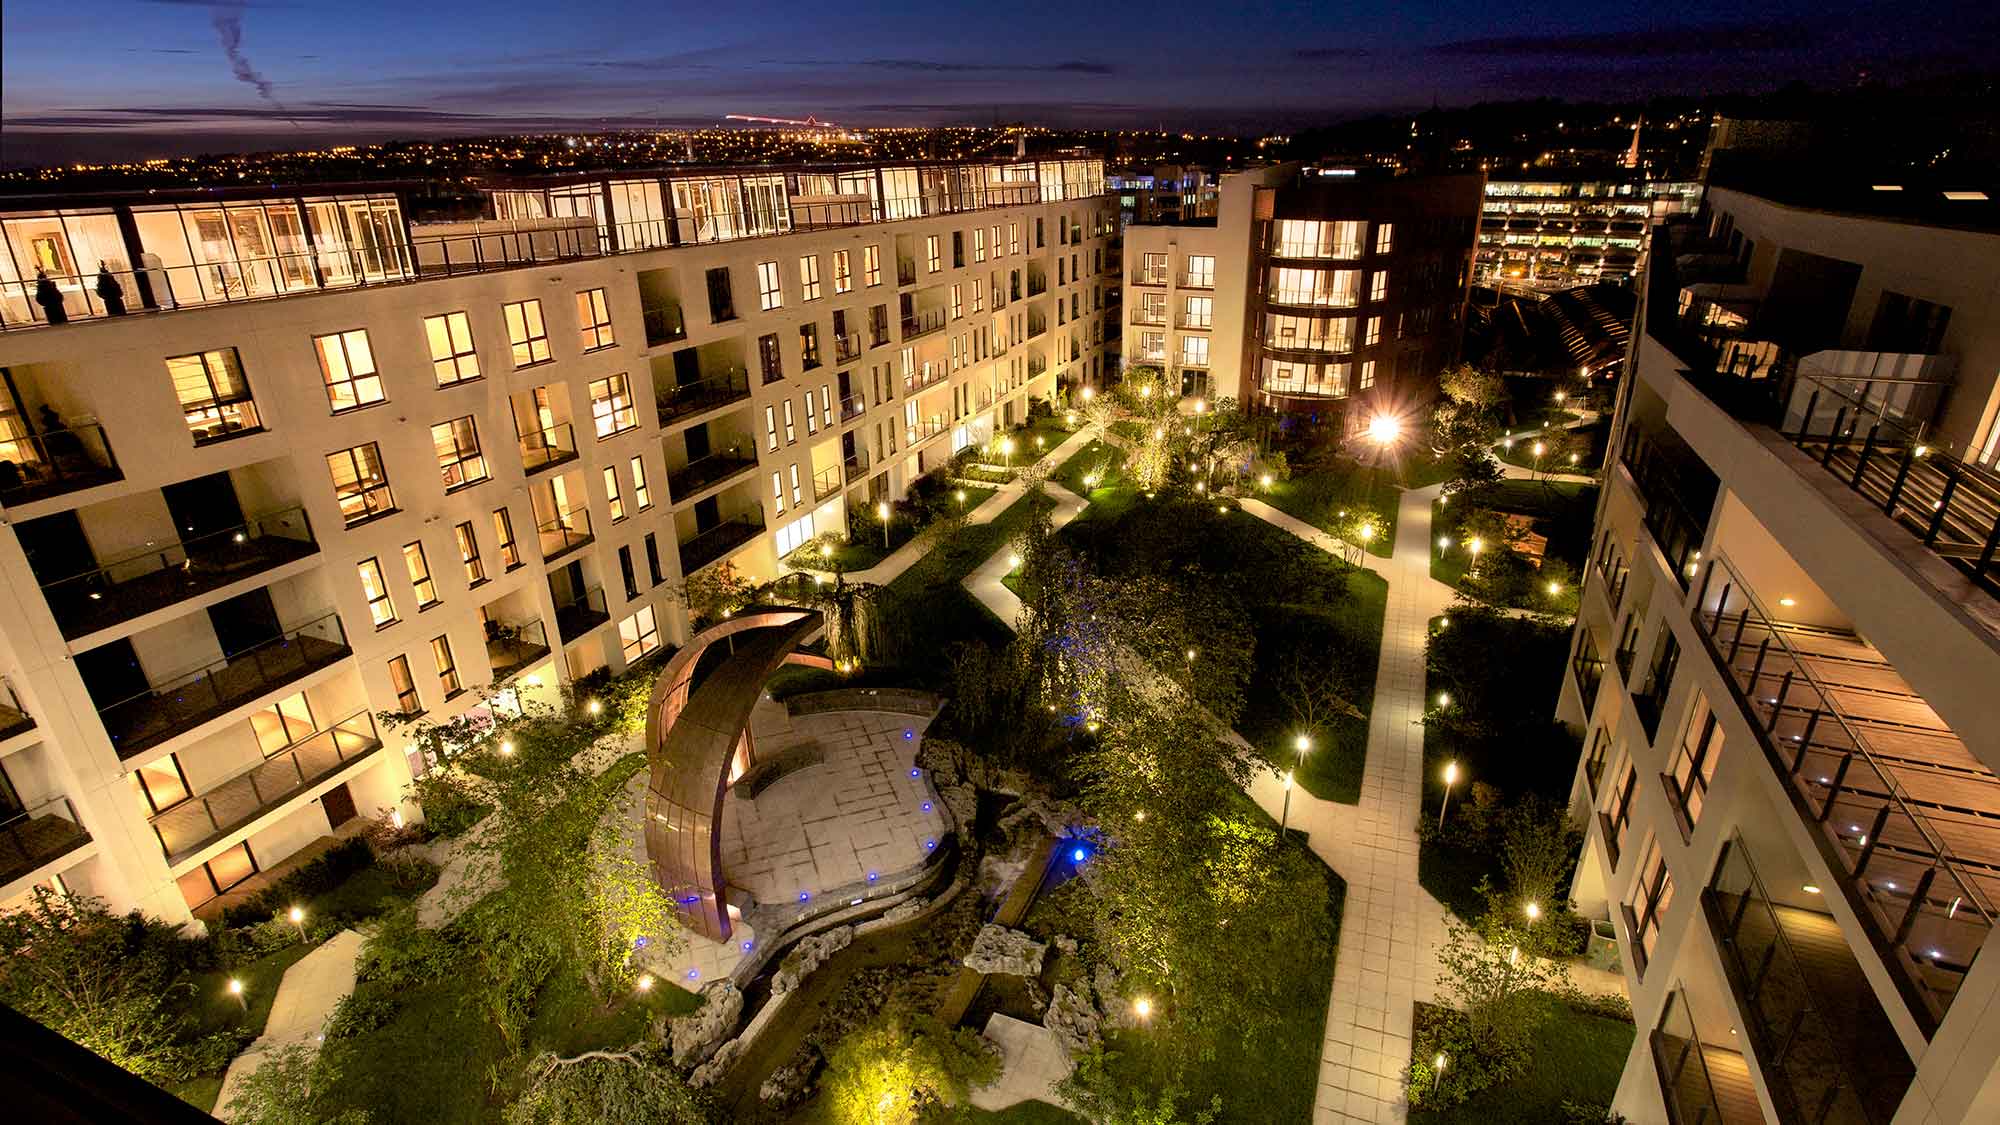 Night-time photo of apartments around courtyard garden, showing lighting around sculptures and on the paths.